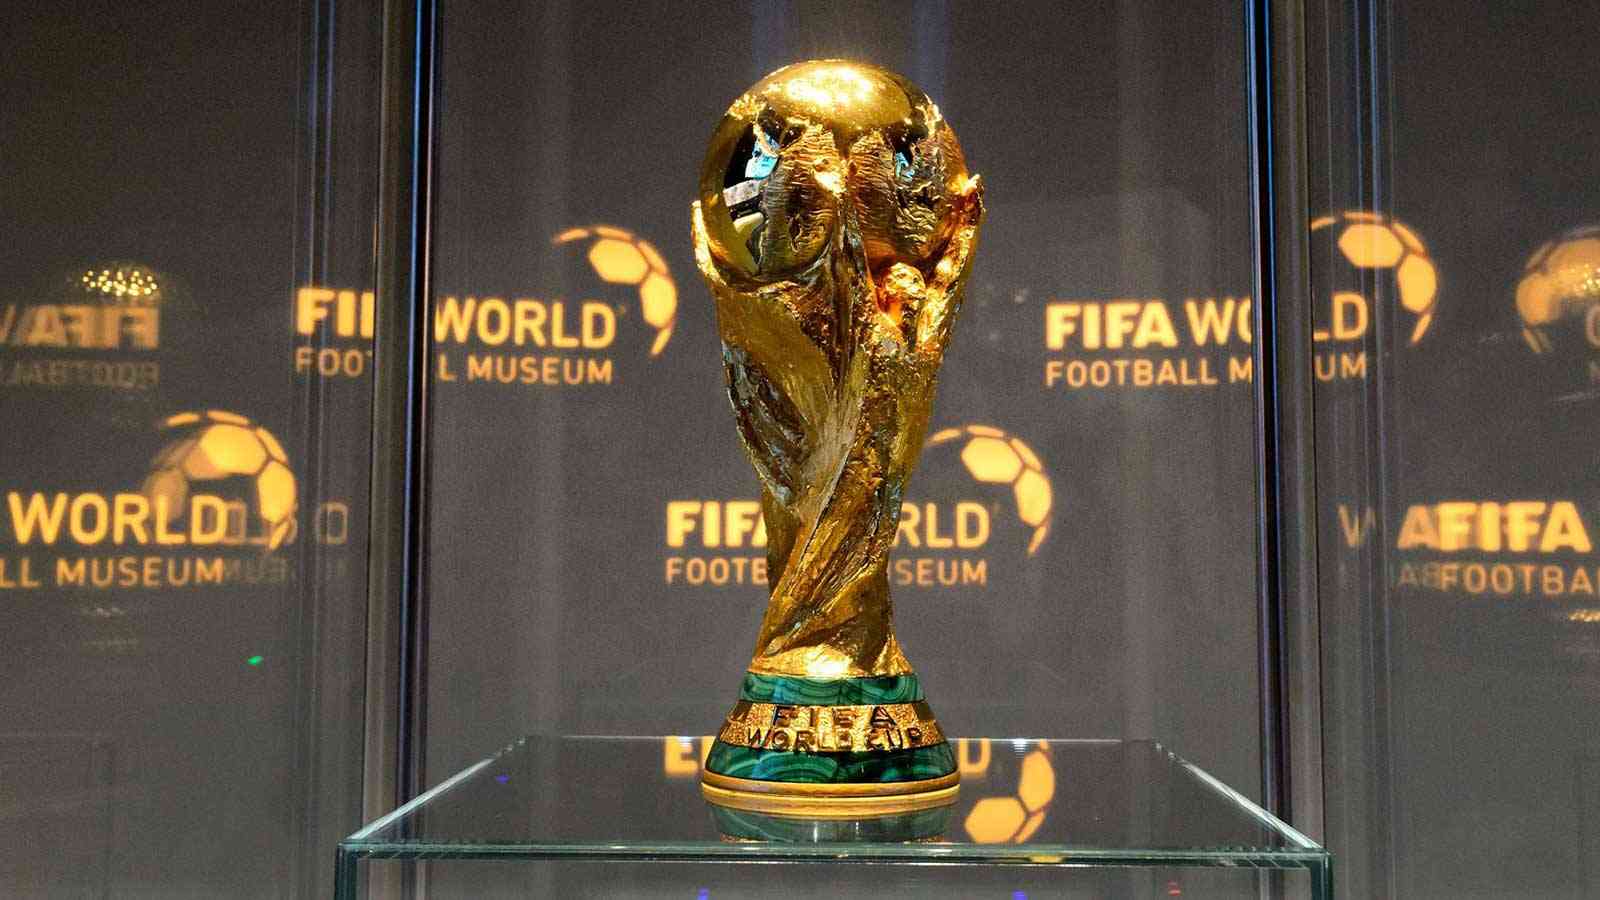 The original version of the FIFA World Cup trophy arrives in Kuwait today